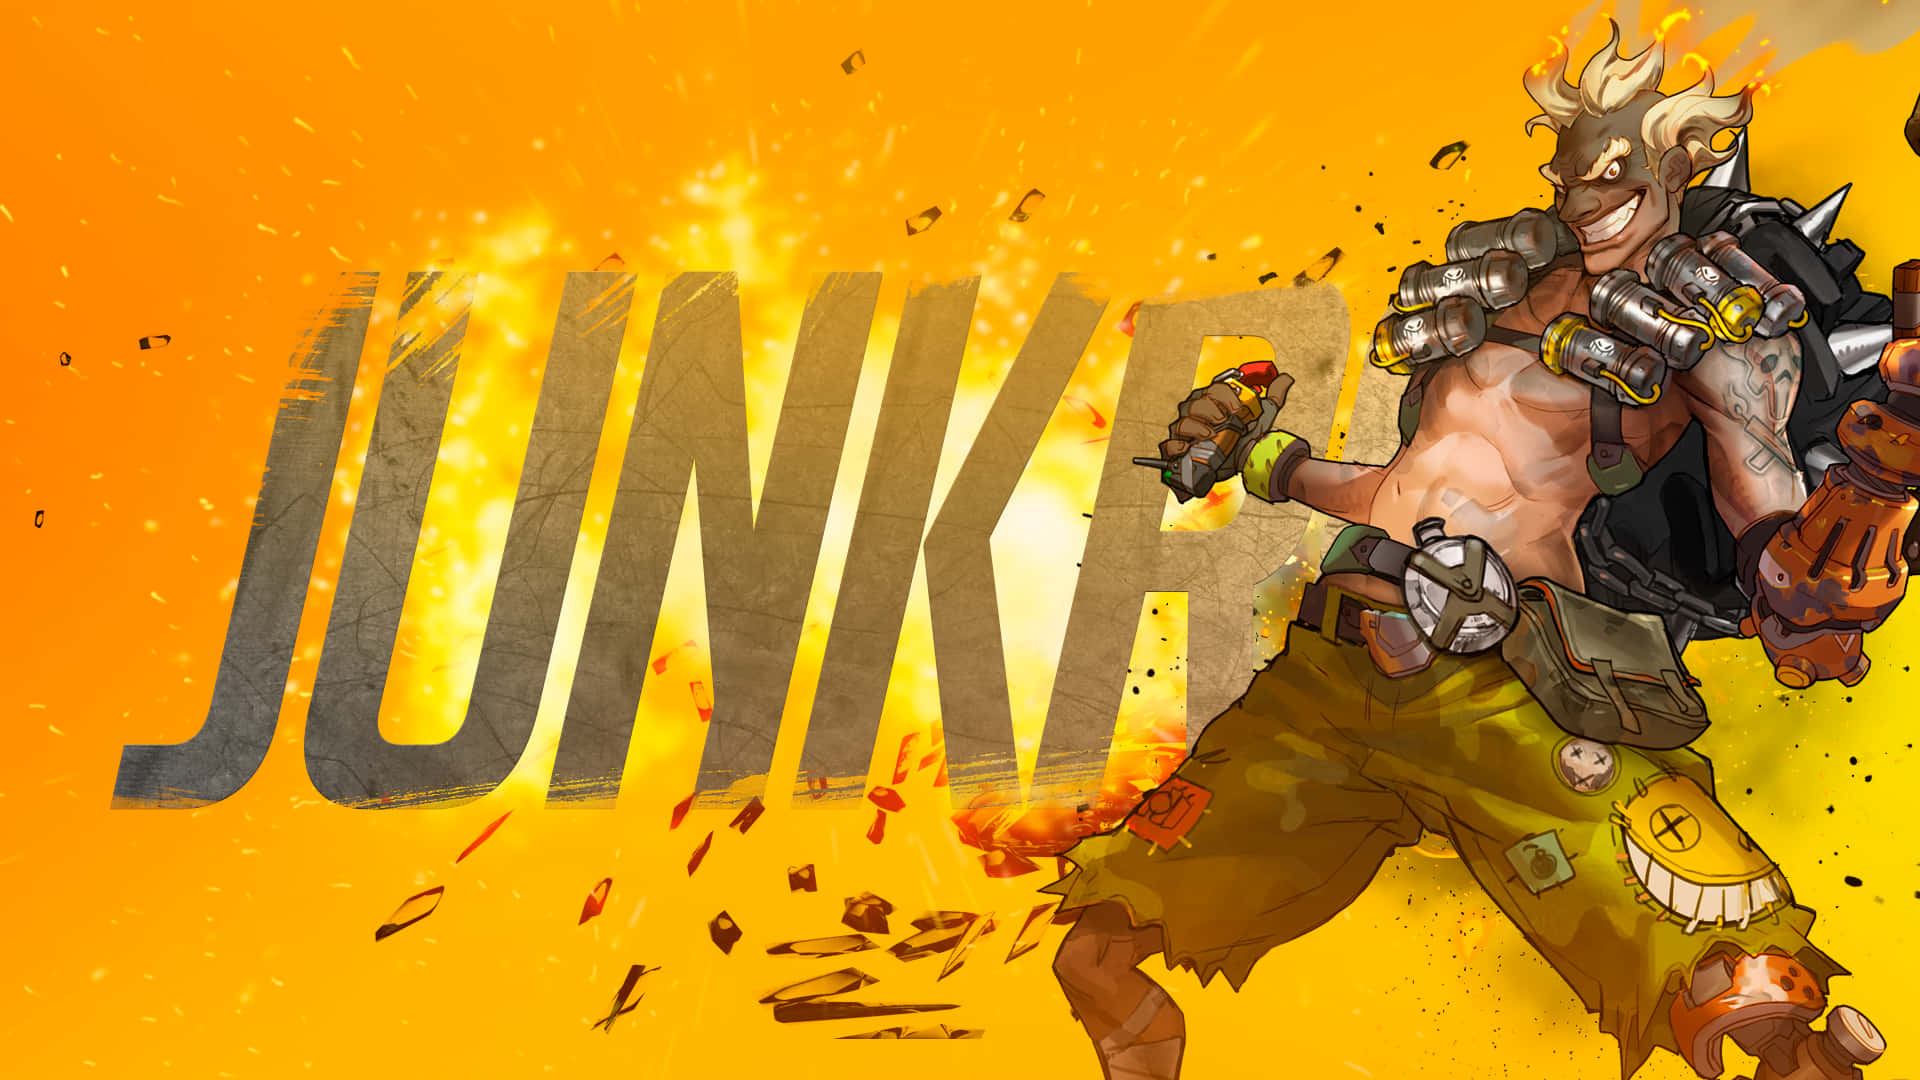 Fire off some insults with Junkrat Wallpaper